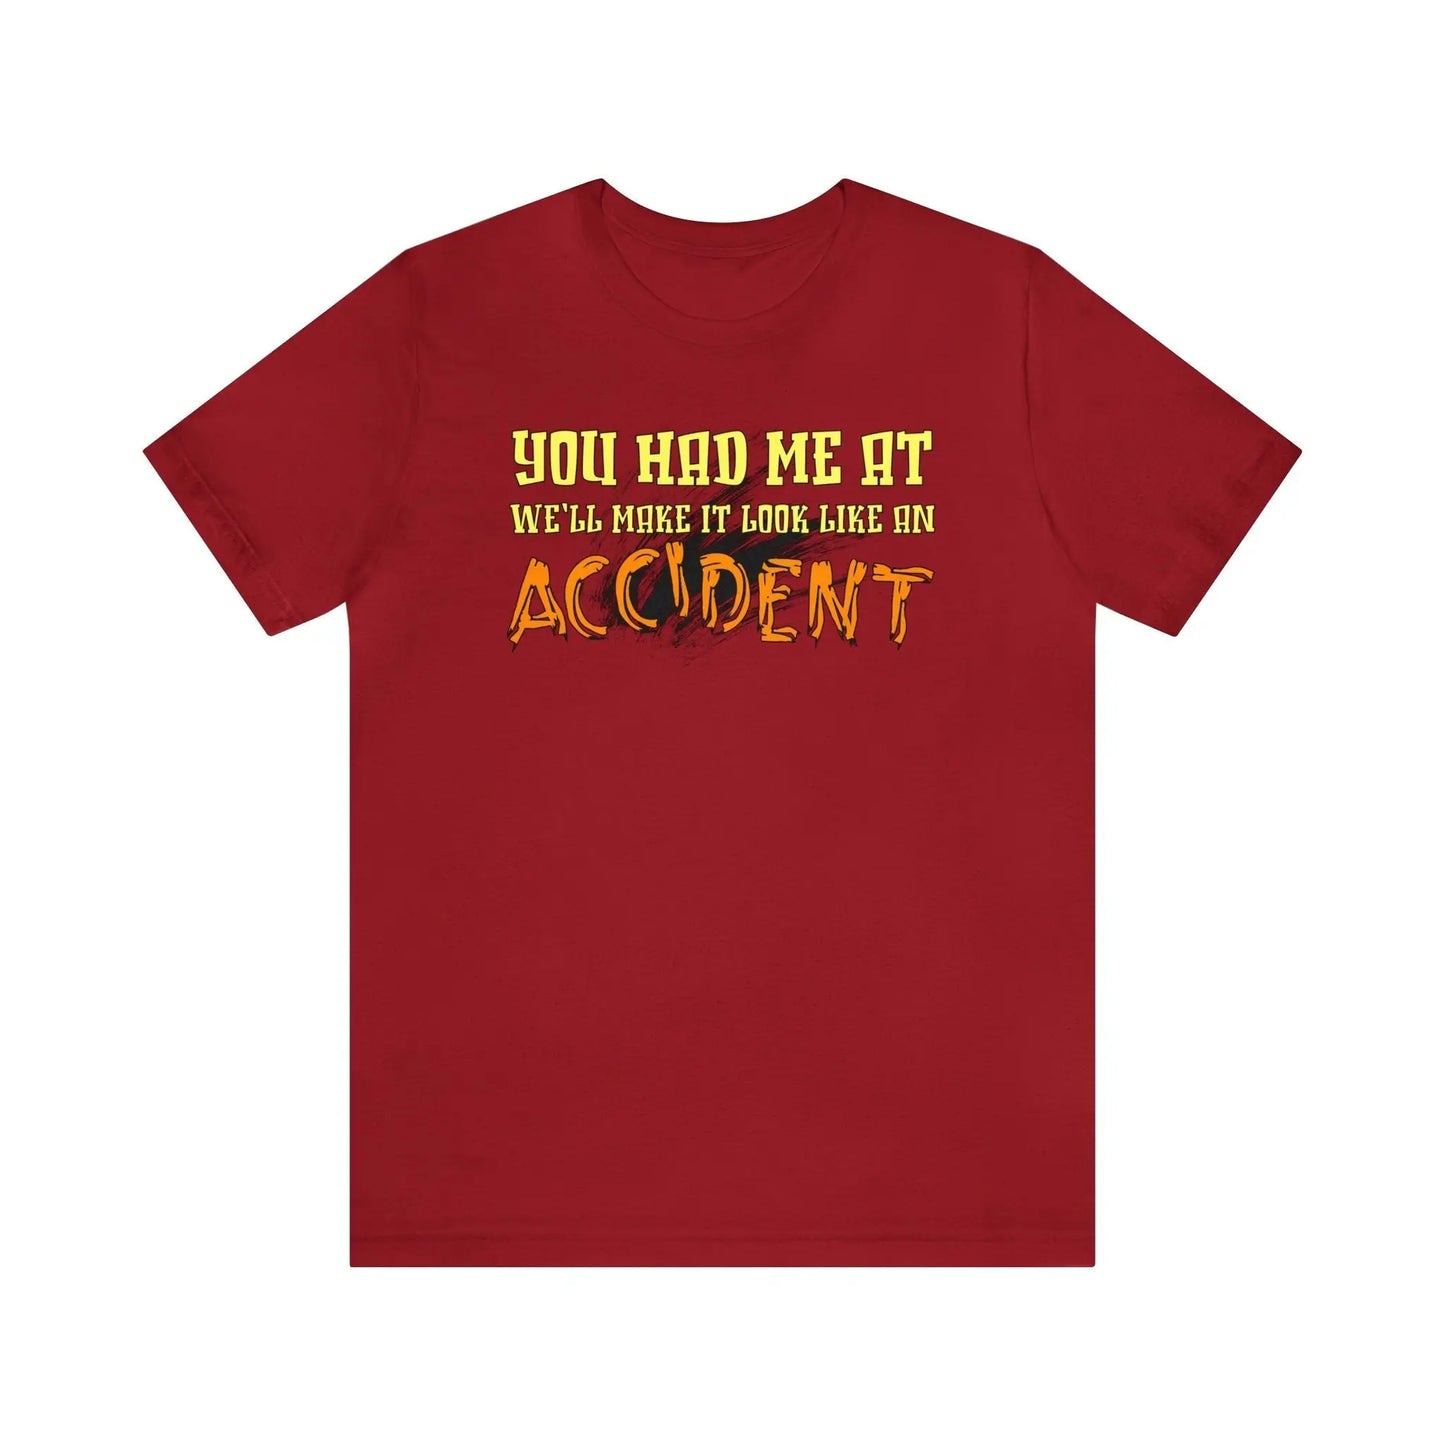 Make It Look Like An Accident Men's Tee - Wicked Tees